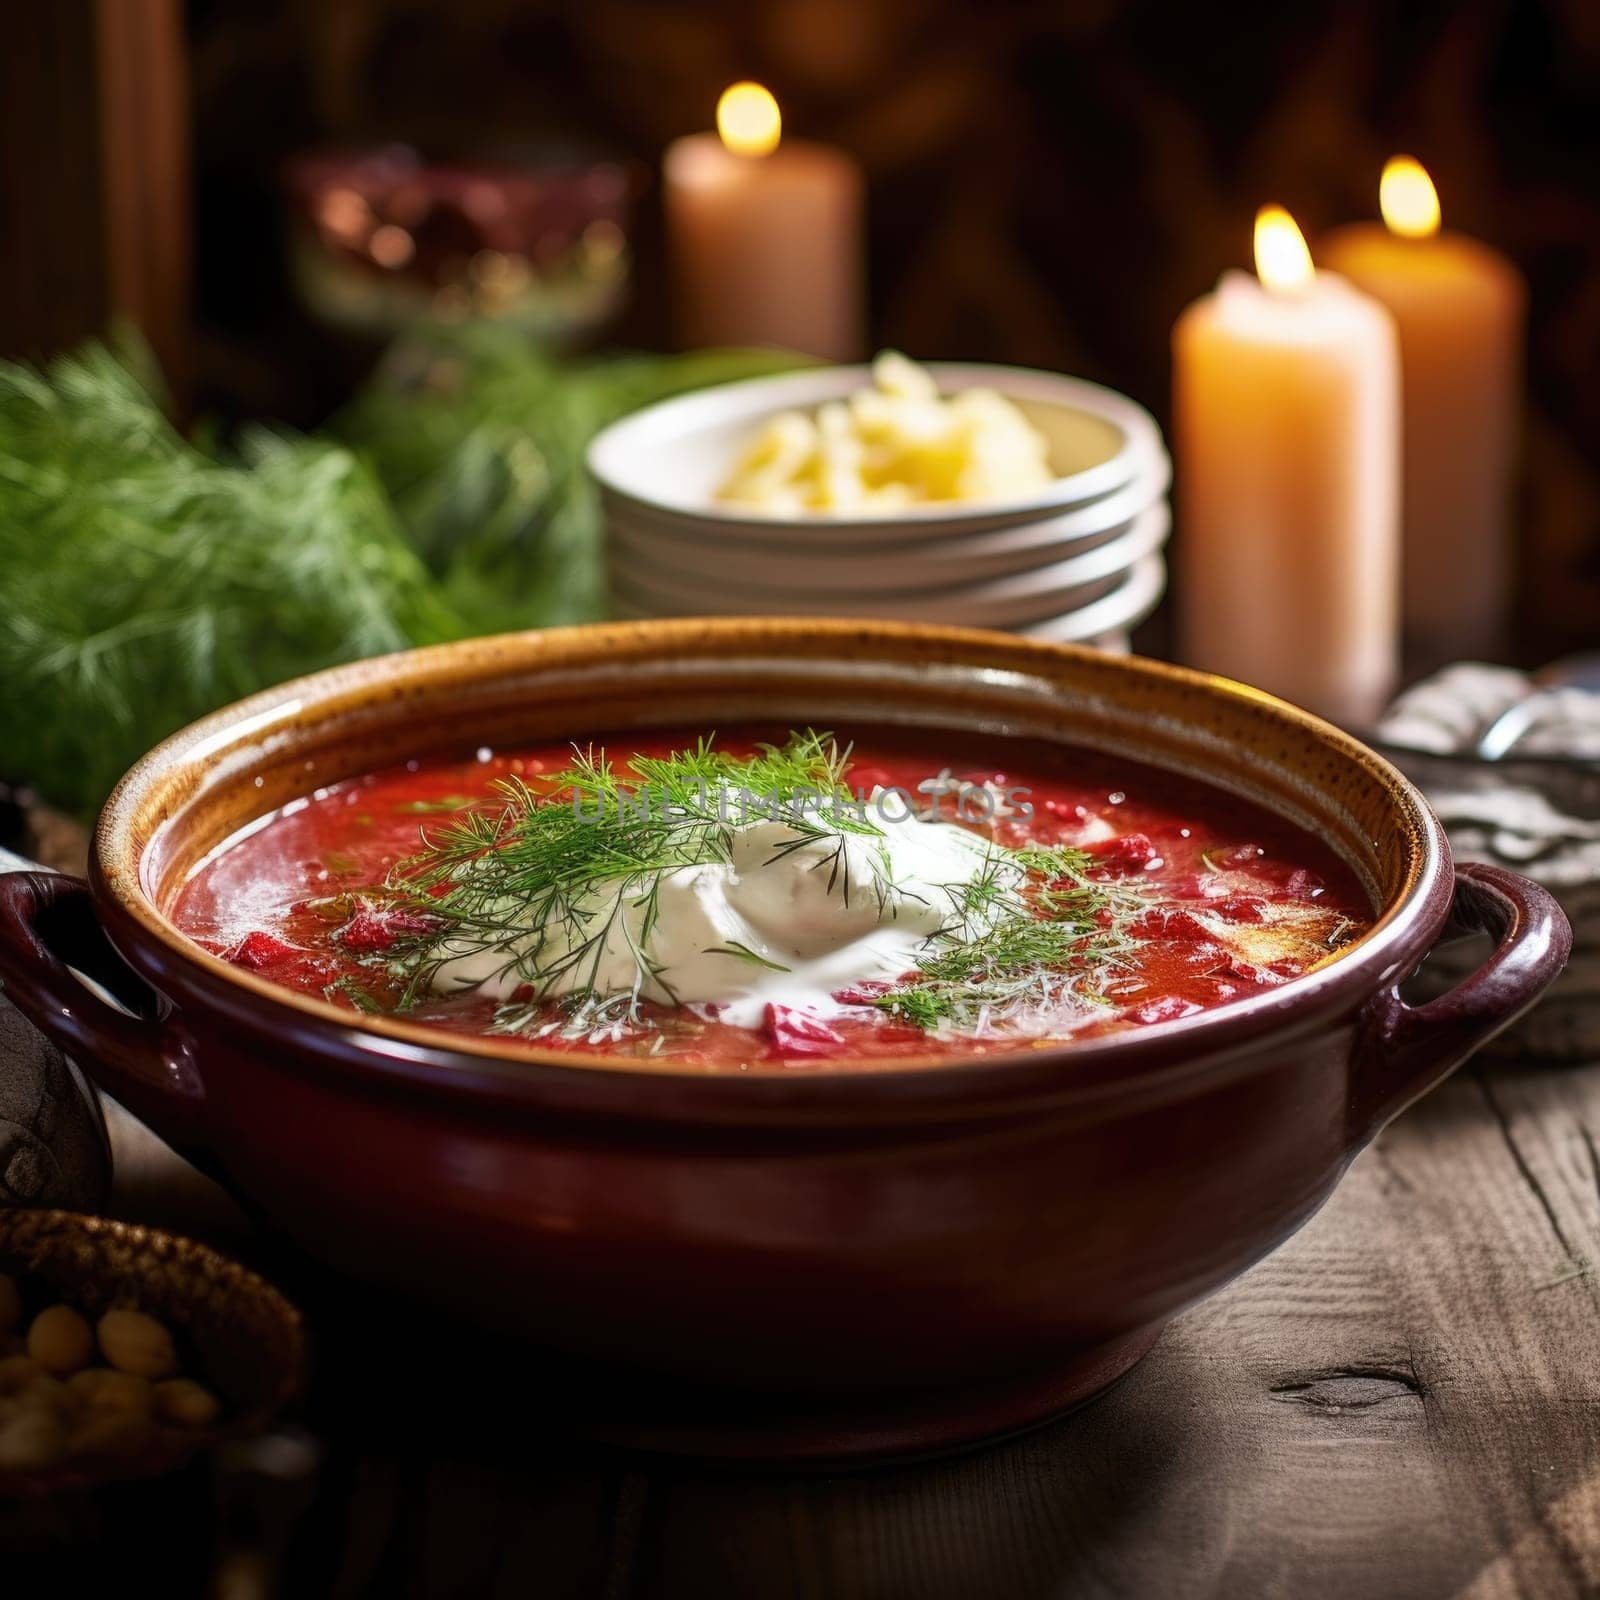 A bowl filled with borscht soup is placed on a table, showcasing the vibrant colors of the soup and the table setting.